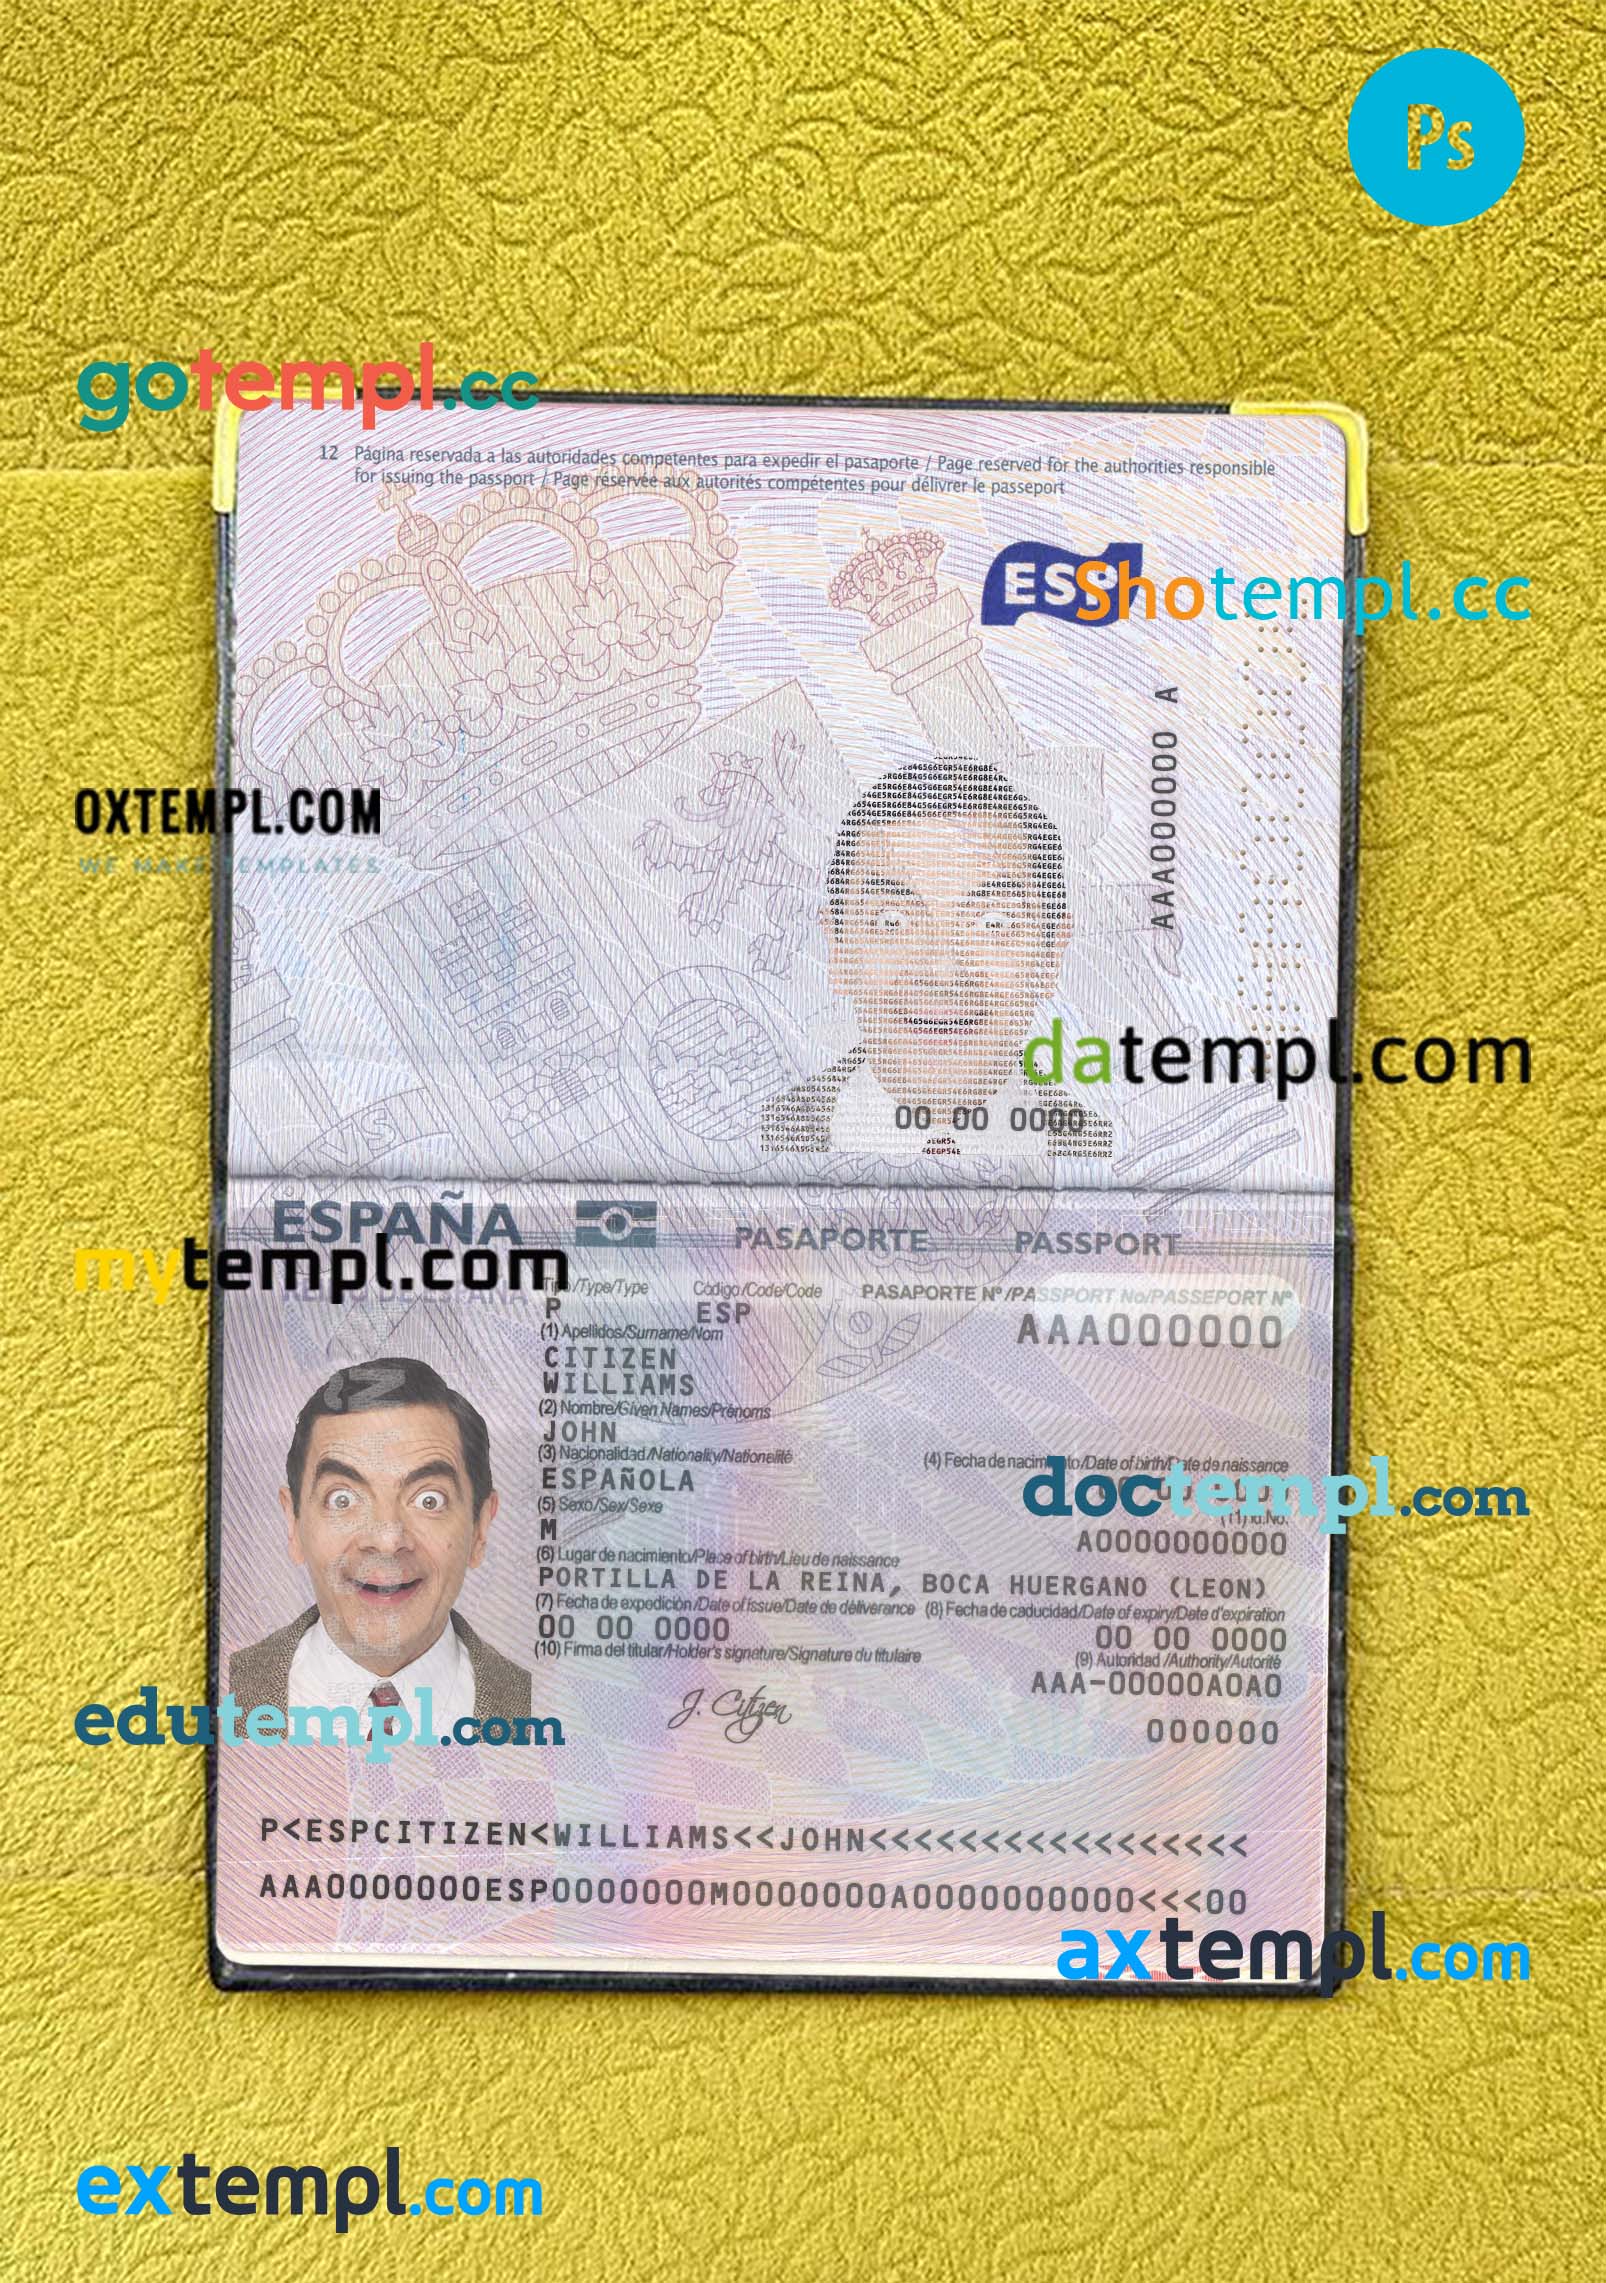 USA Pensylvania driving license PSD files, scan look and photographed image, 2 in 1